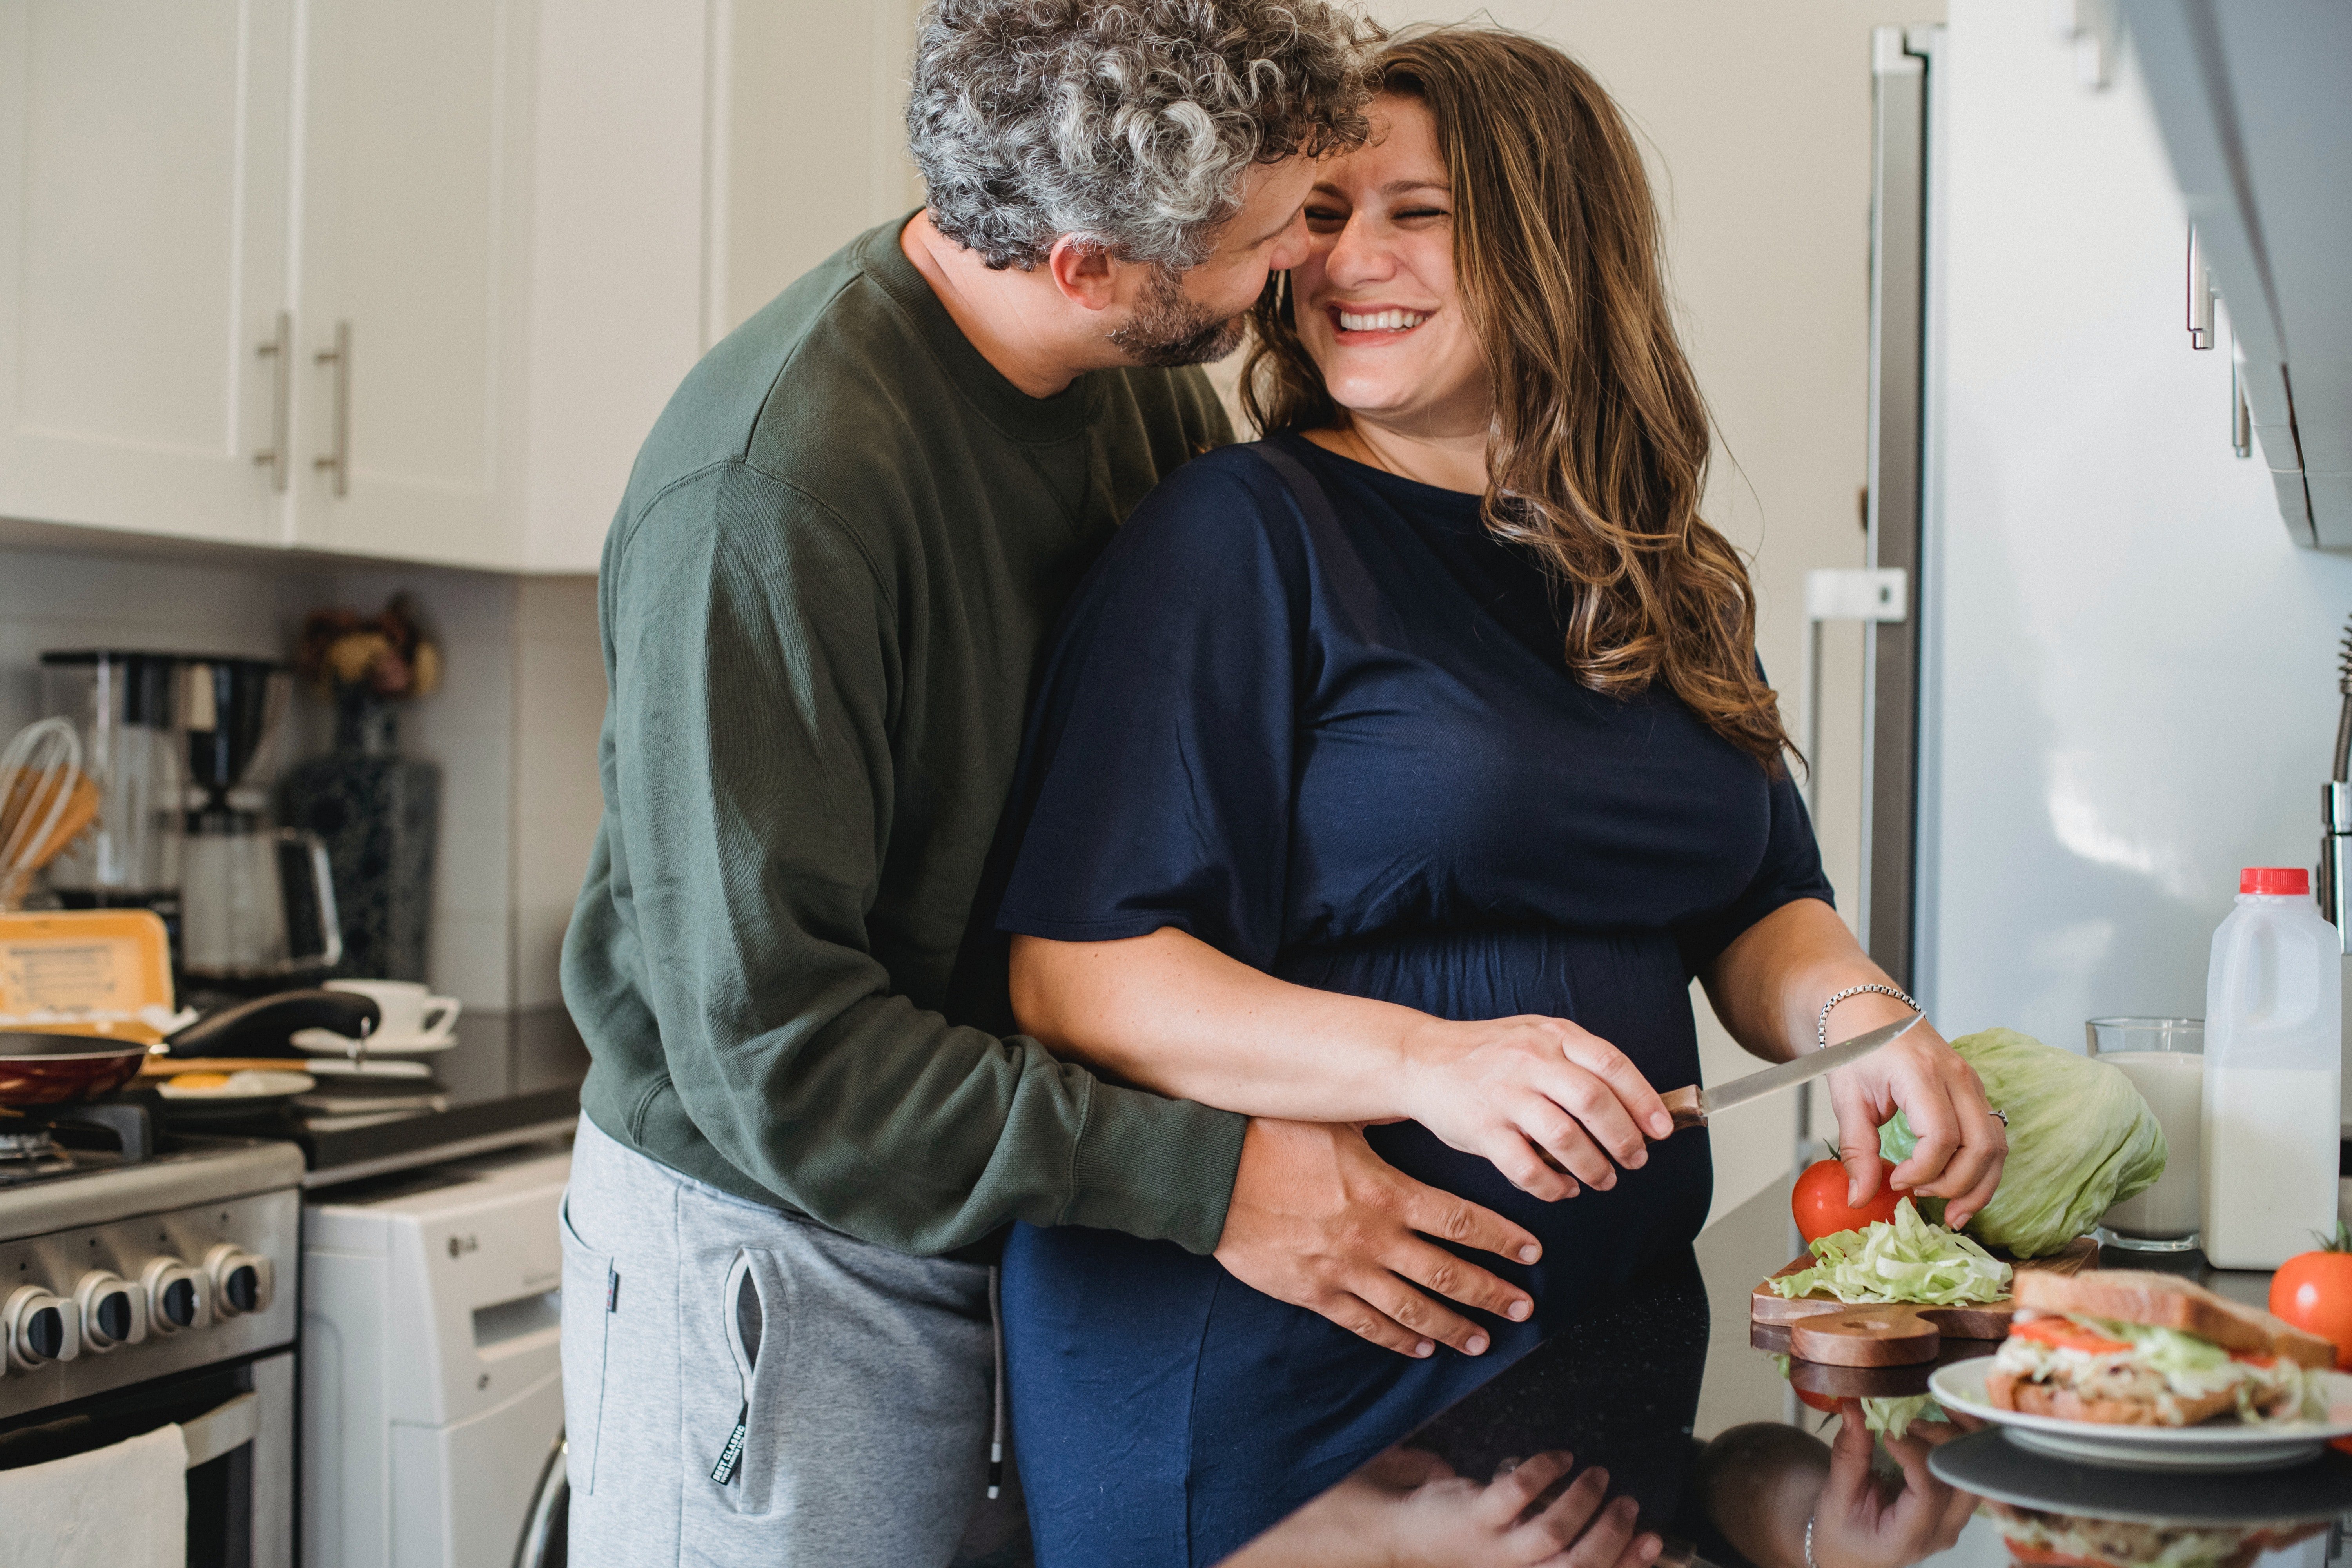 A husband lovingly embracing his pregnant wife while she’s cooking. | Photo: Pexels/Amina Philkins